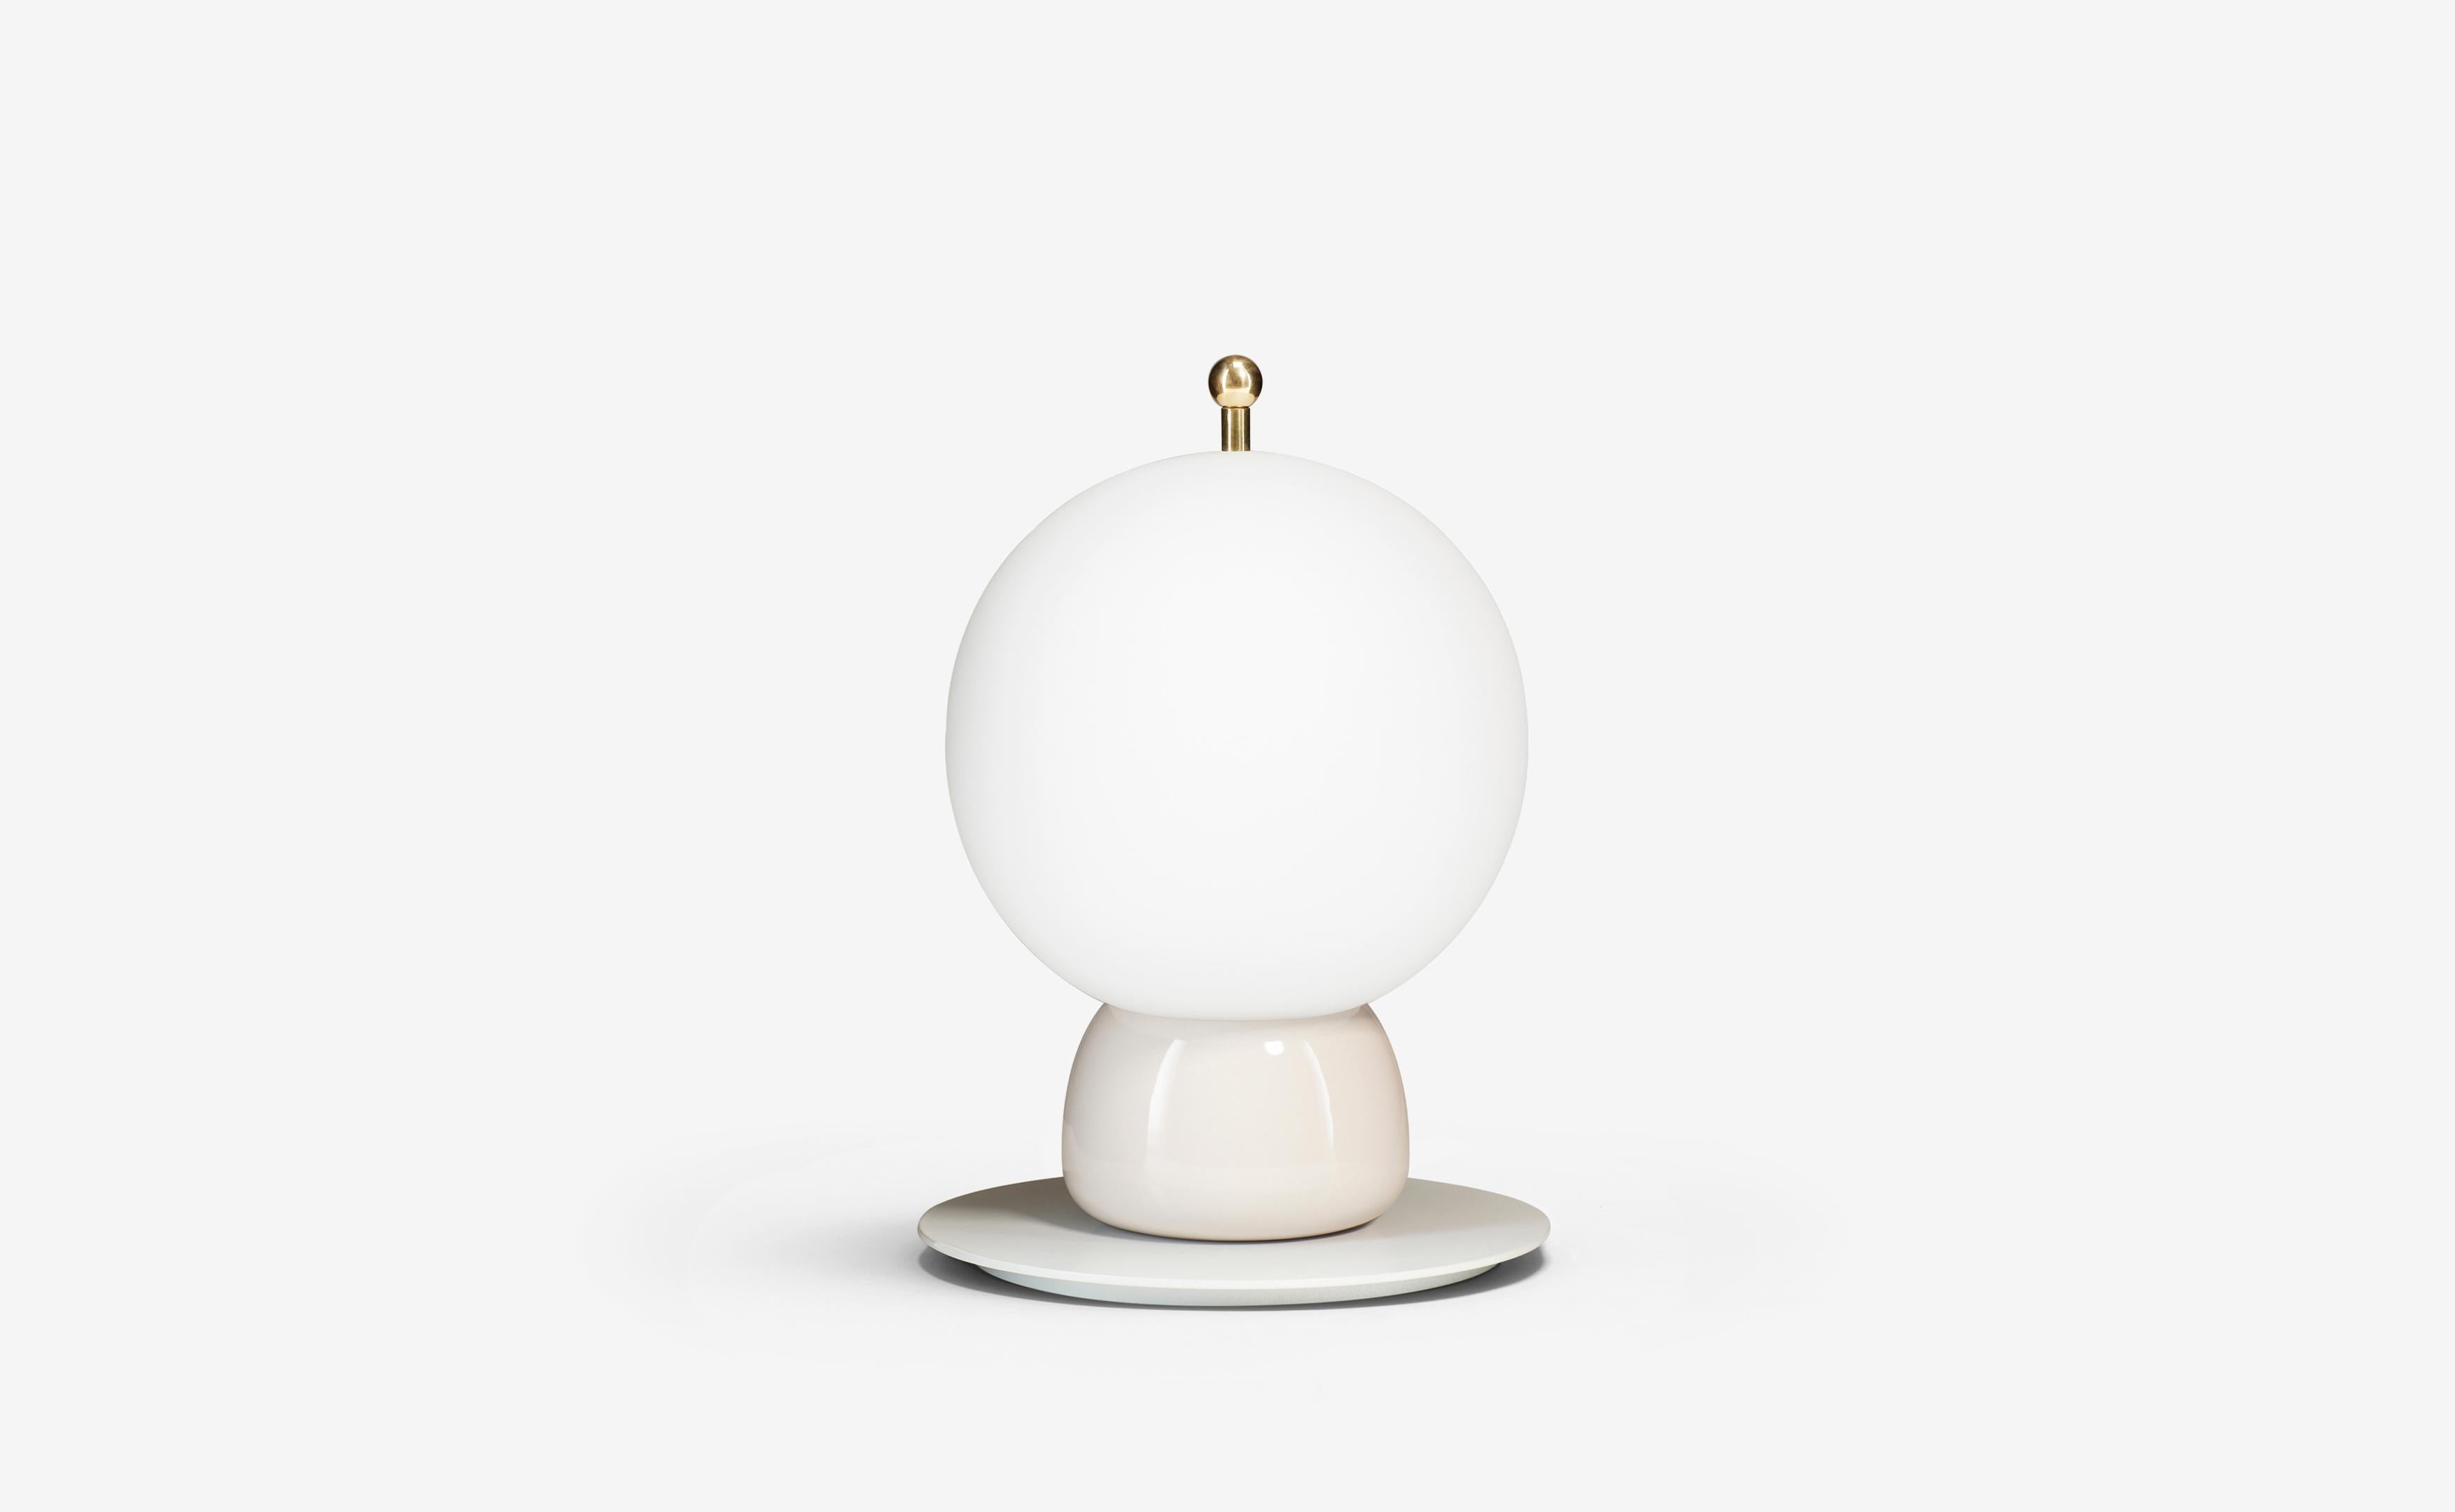 Introducing the Elegant and Whimsical Athena Frosted Glass Sphere Lamps by Ini Archibong

Discover a one-of-a-kind lighting design that is both unique and functional with the Athena sphere lamps. Designed by the talented Ini Archibong, this table